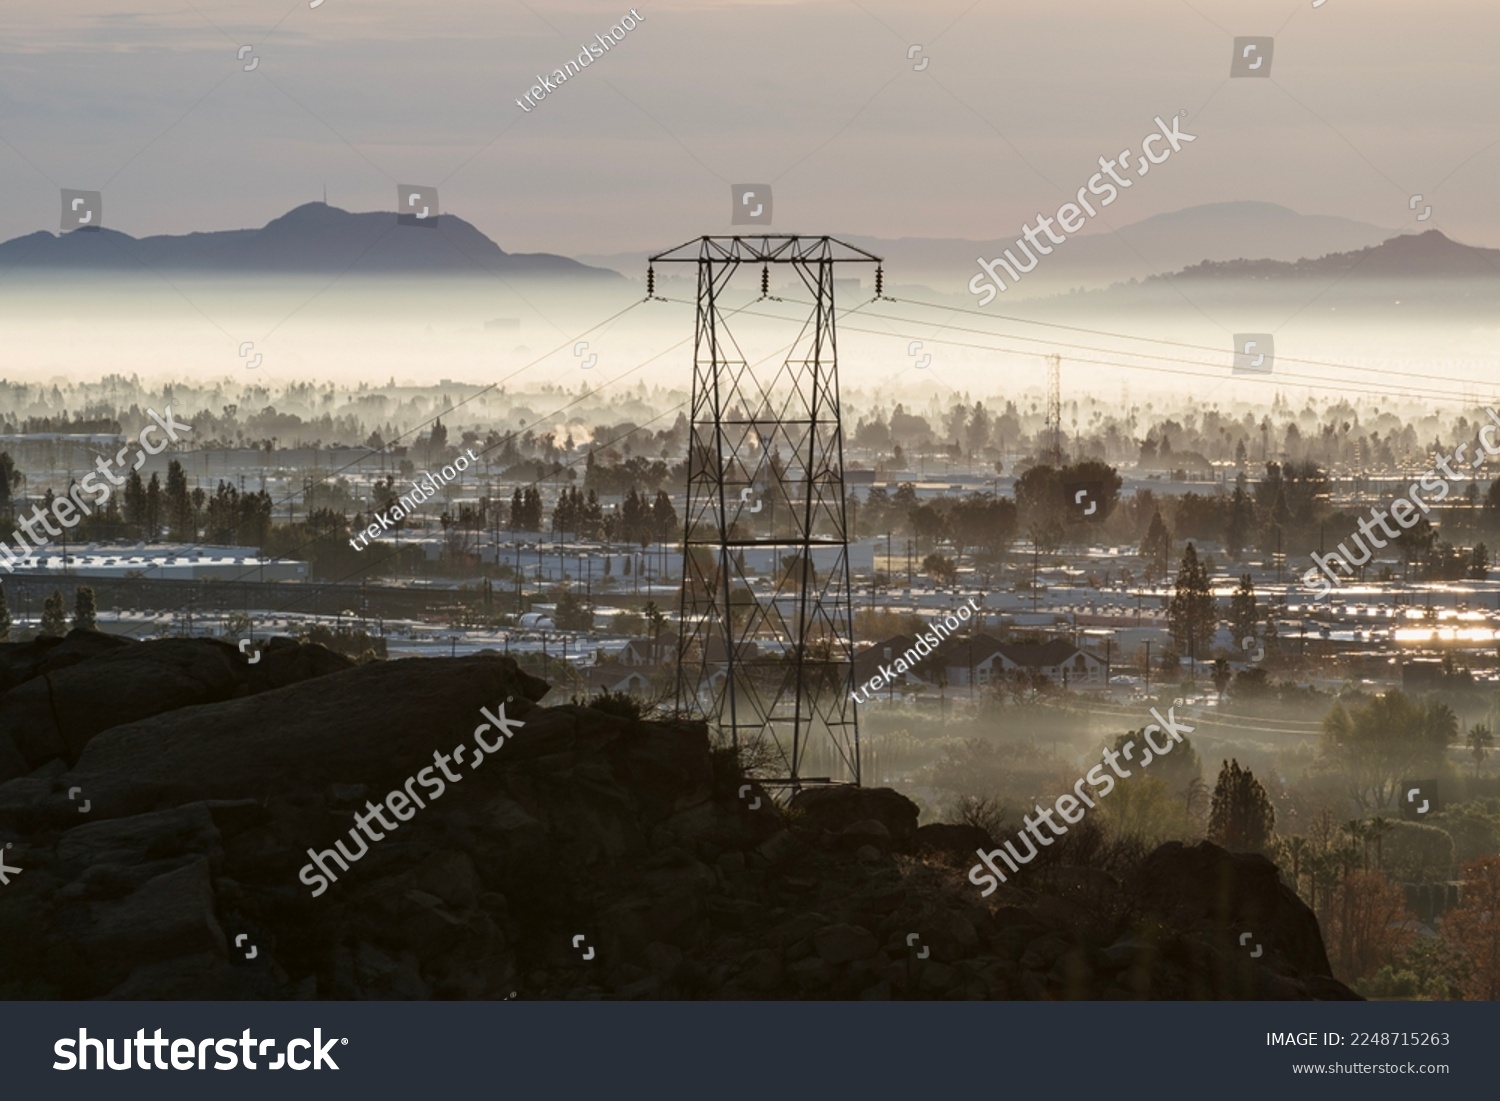 Electric power tower in the foggy Chatsworth neighborhood of Los Angeles California. #2248715263